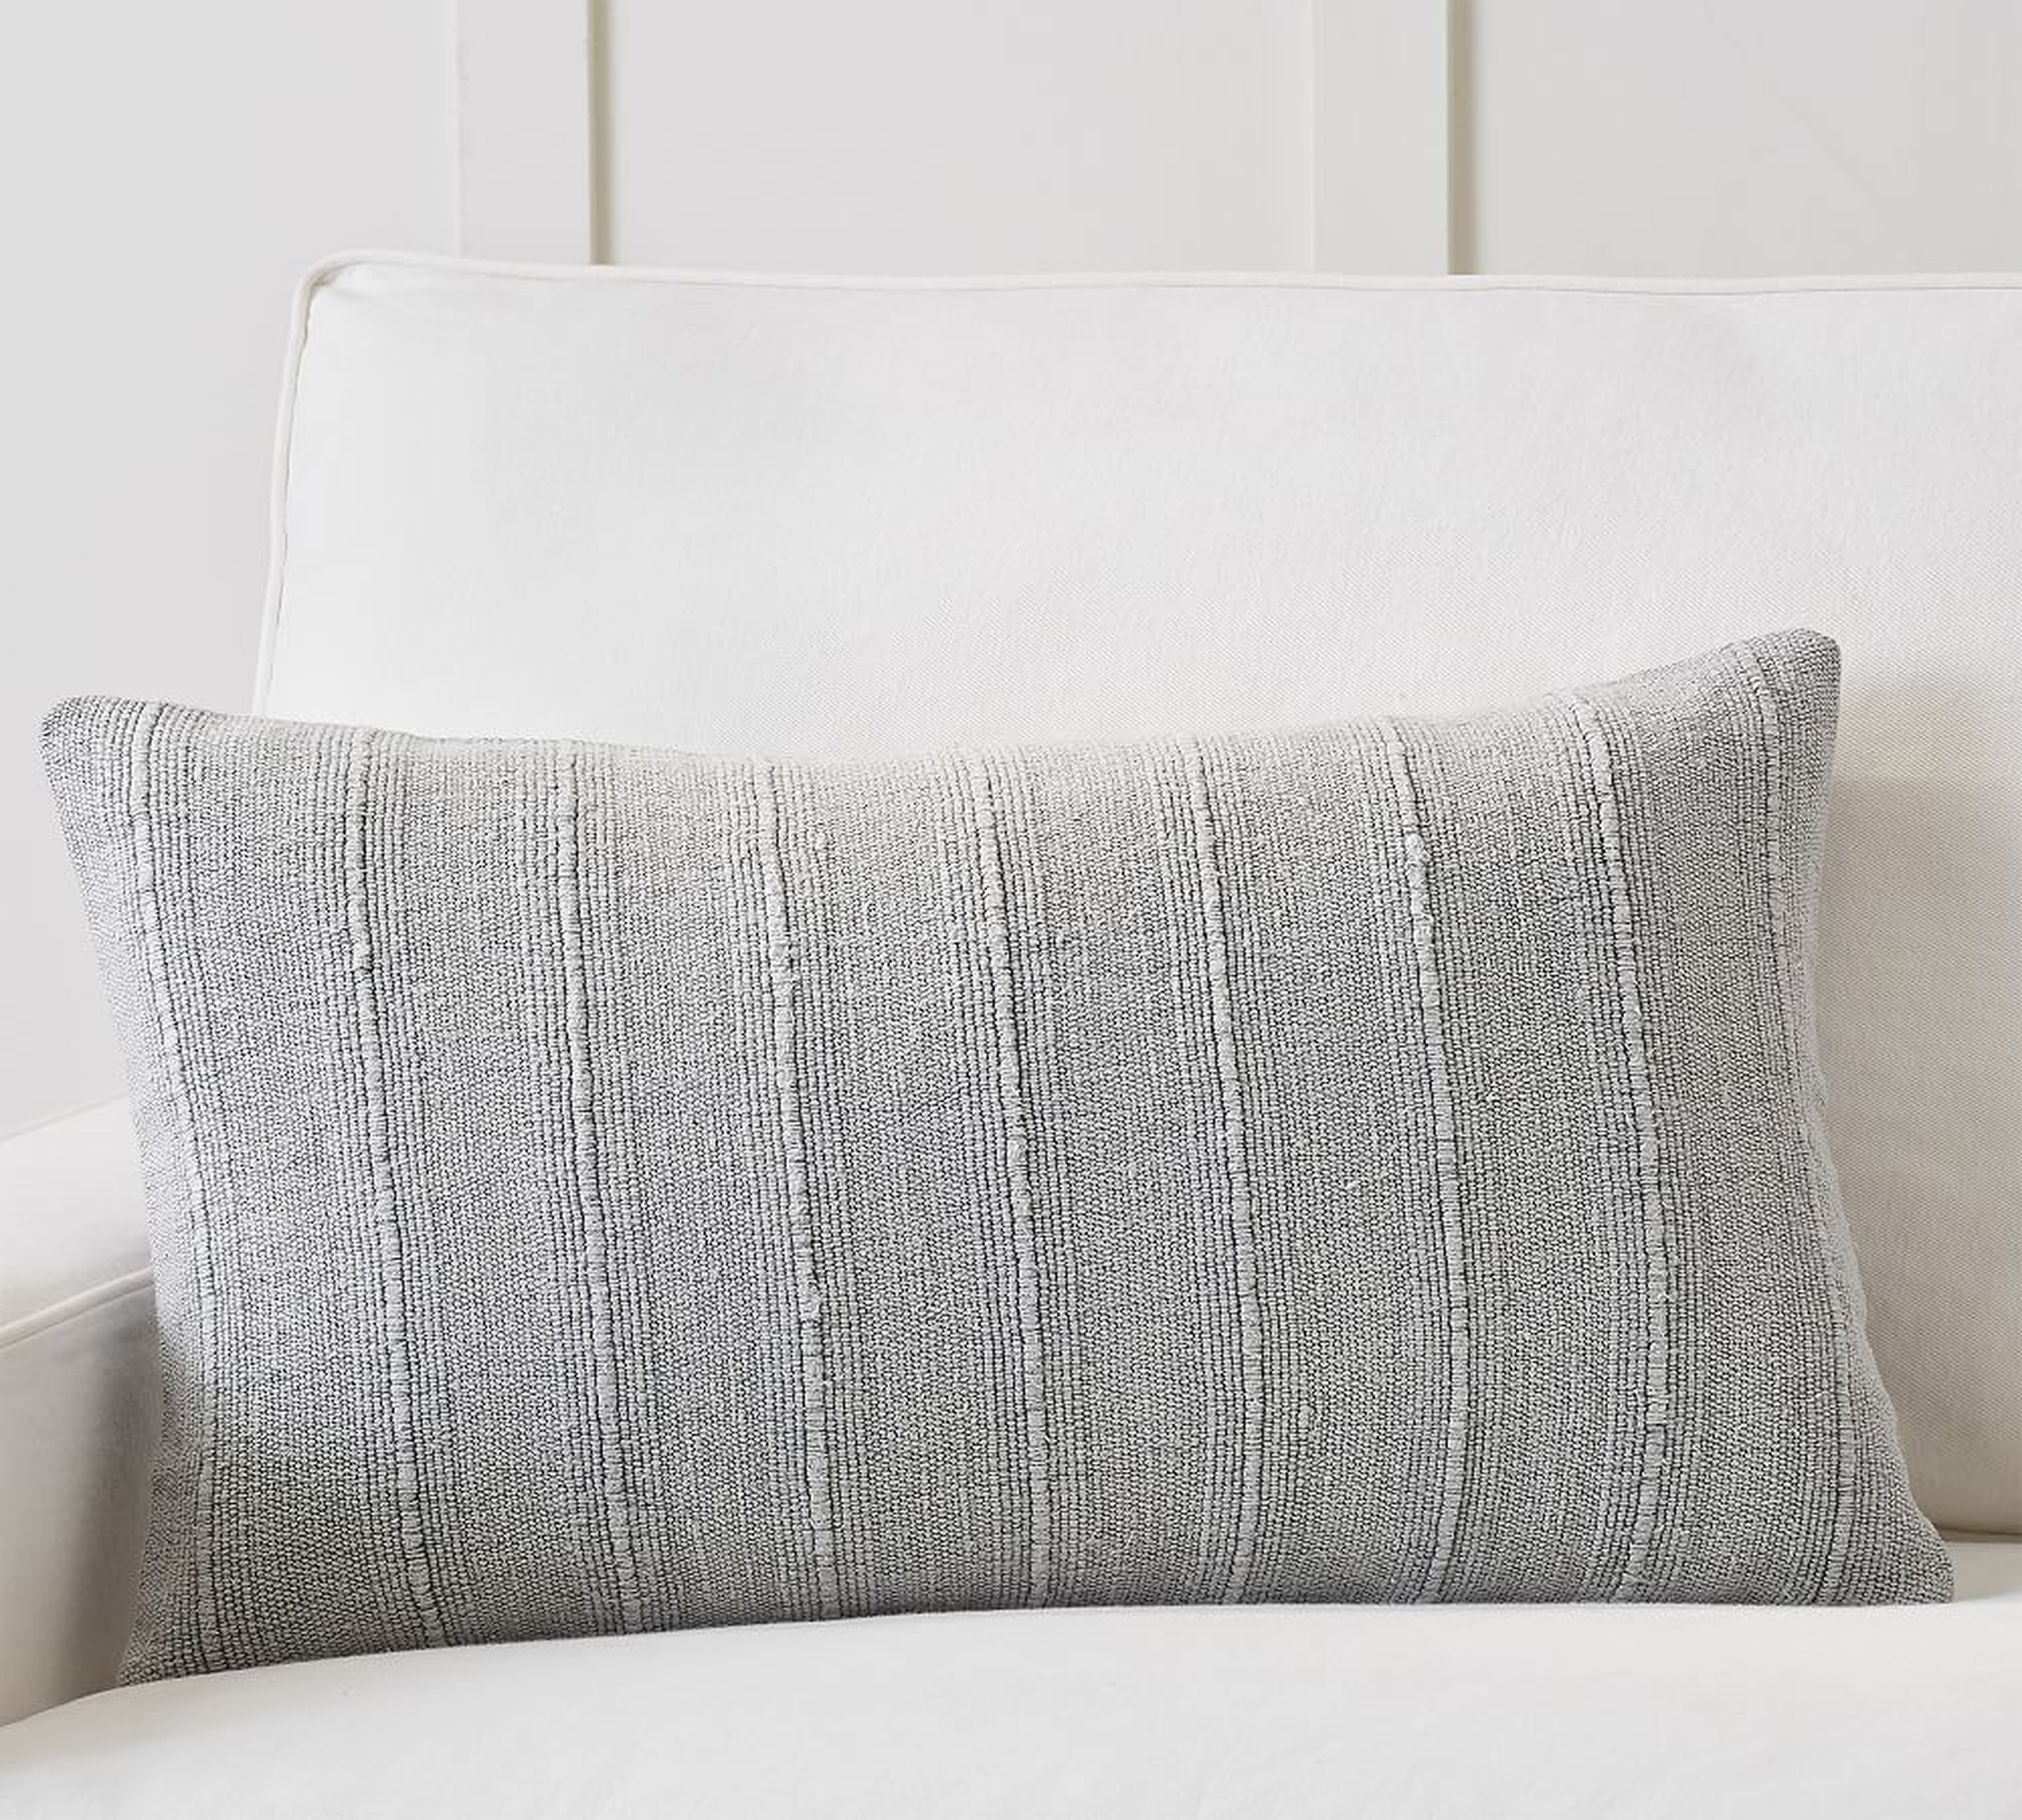 Relaxed Striped Lumbar Pillow Cover, 16 x 26", Gray - Pottery Barn